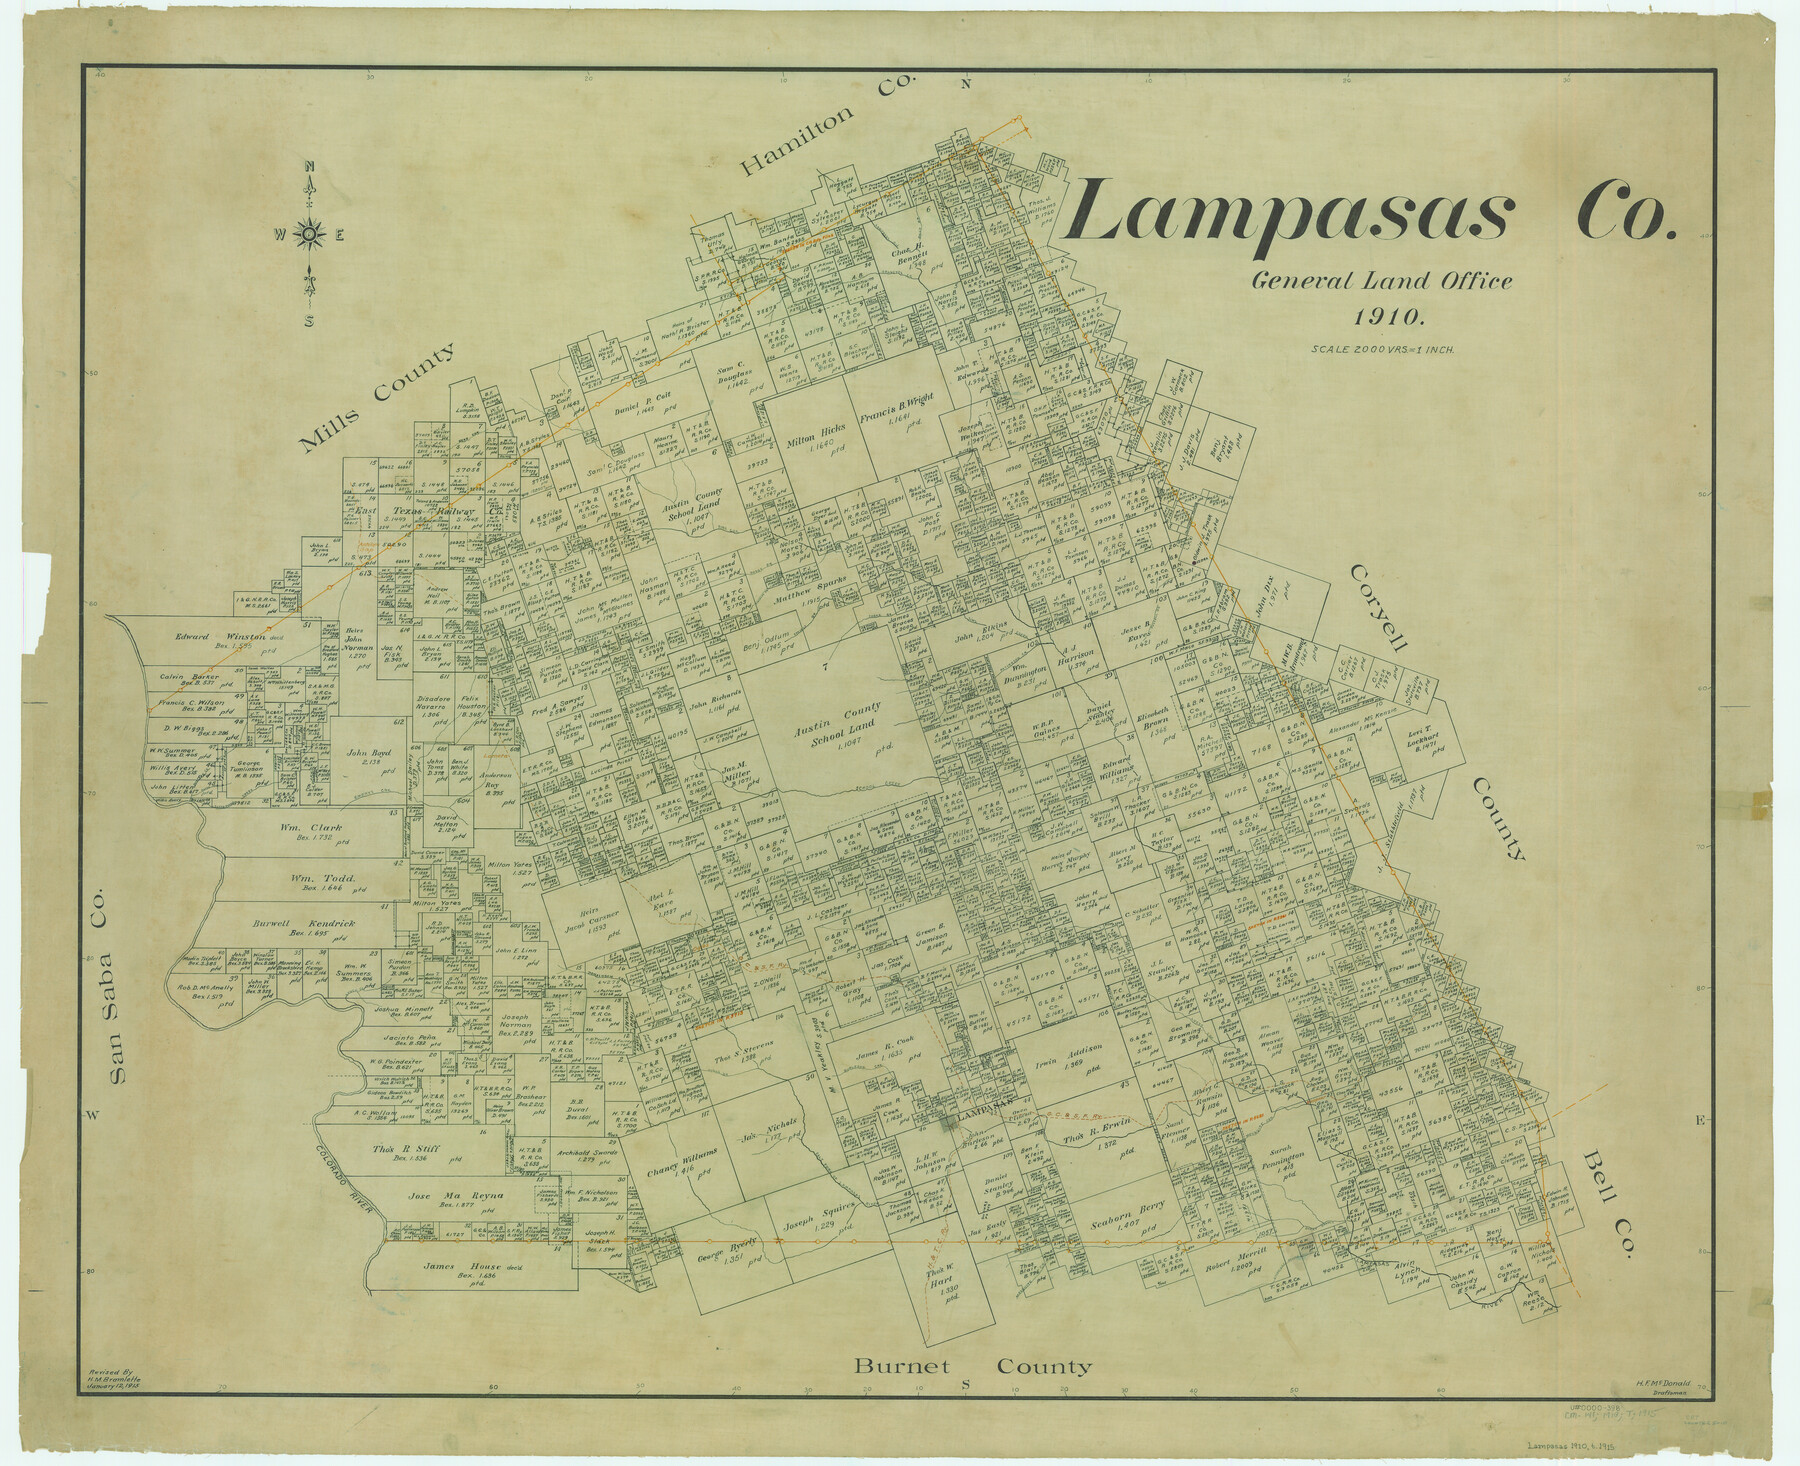 5010, Lampasas Co., General Map Collection